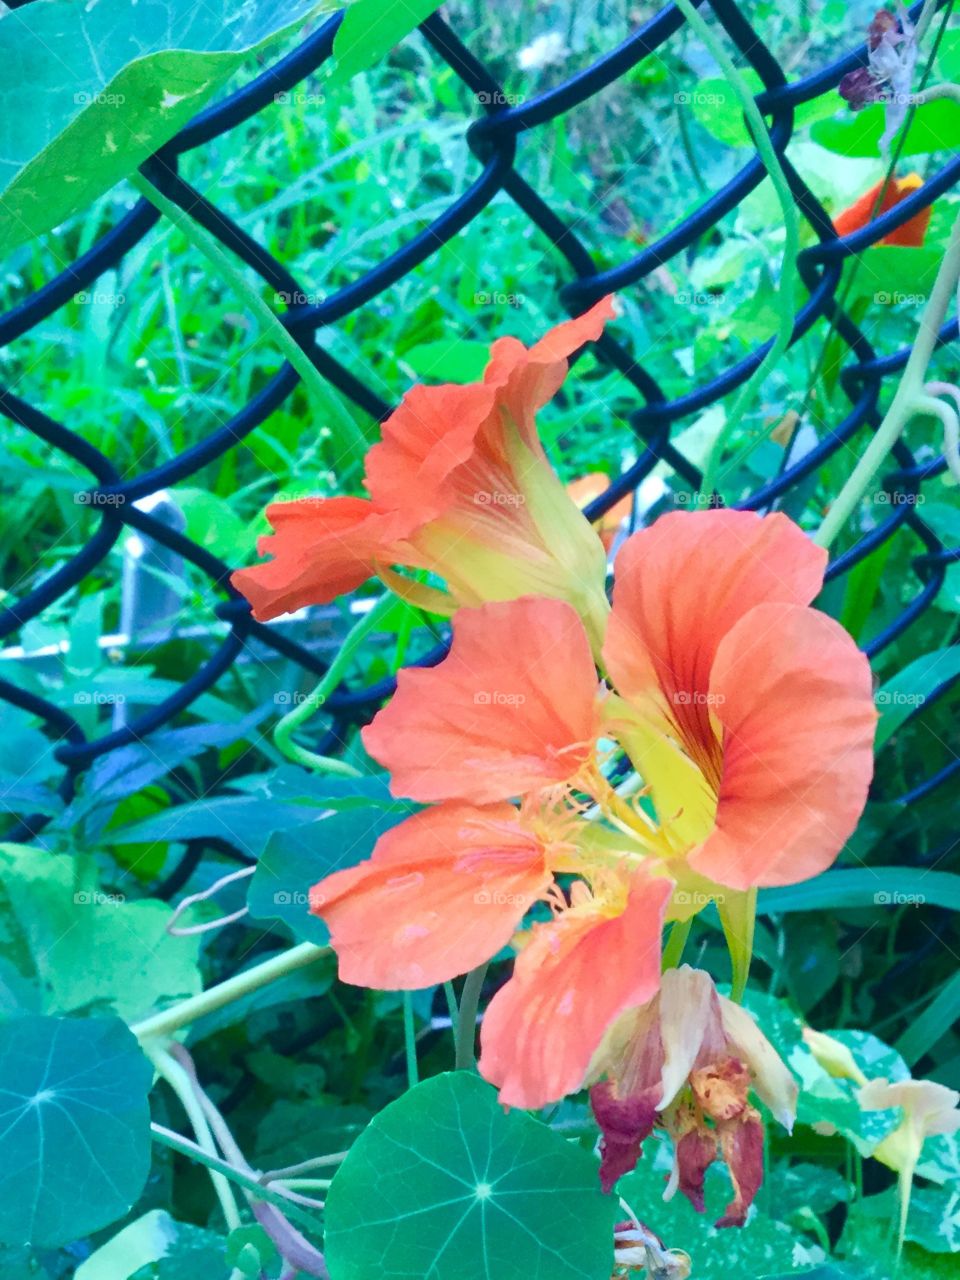 Beautiful Orange Flower next to a bright black fence, great picture and would look awesome on a website!